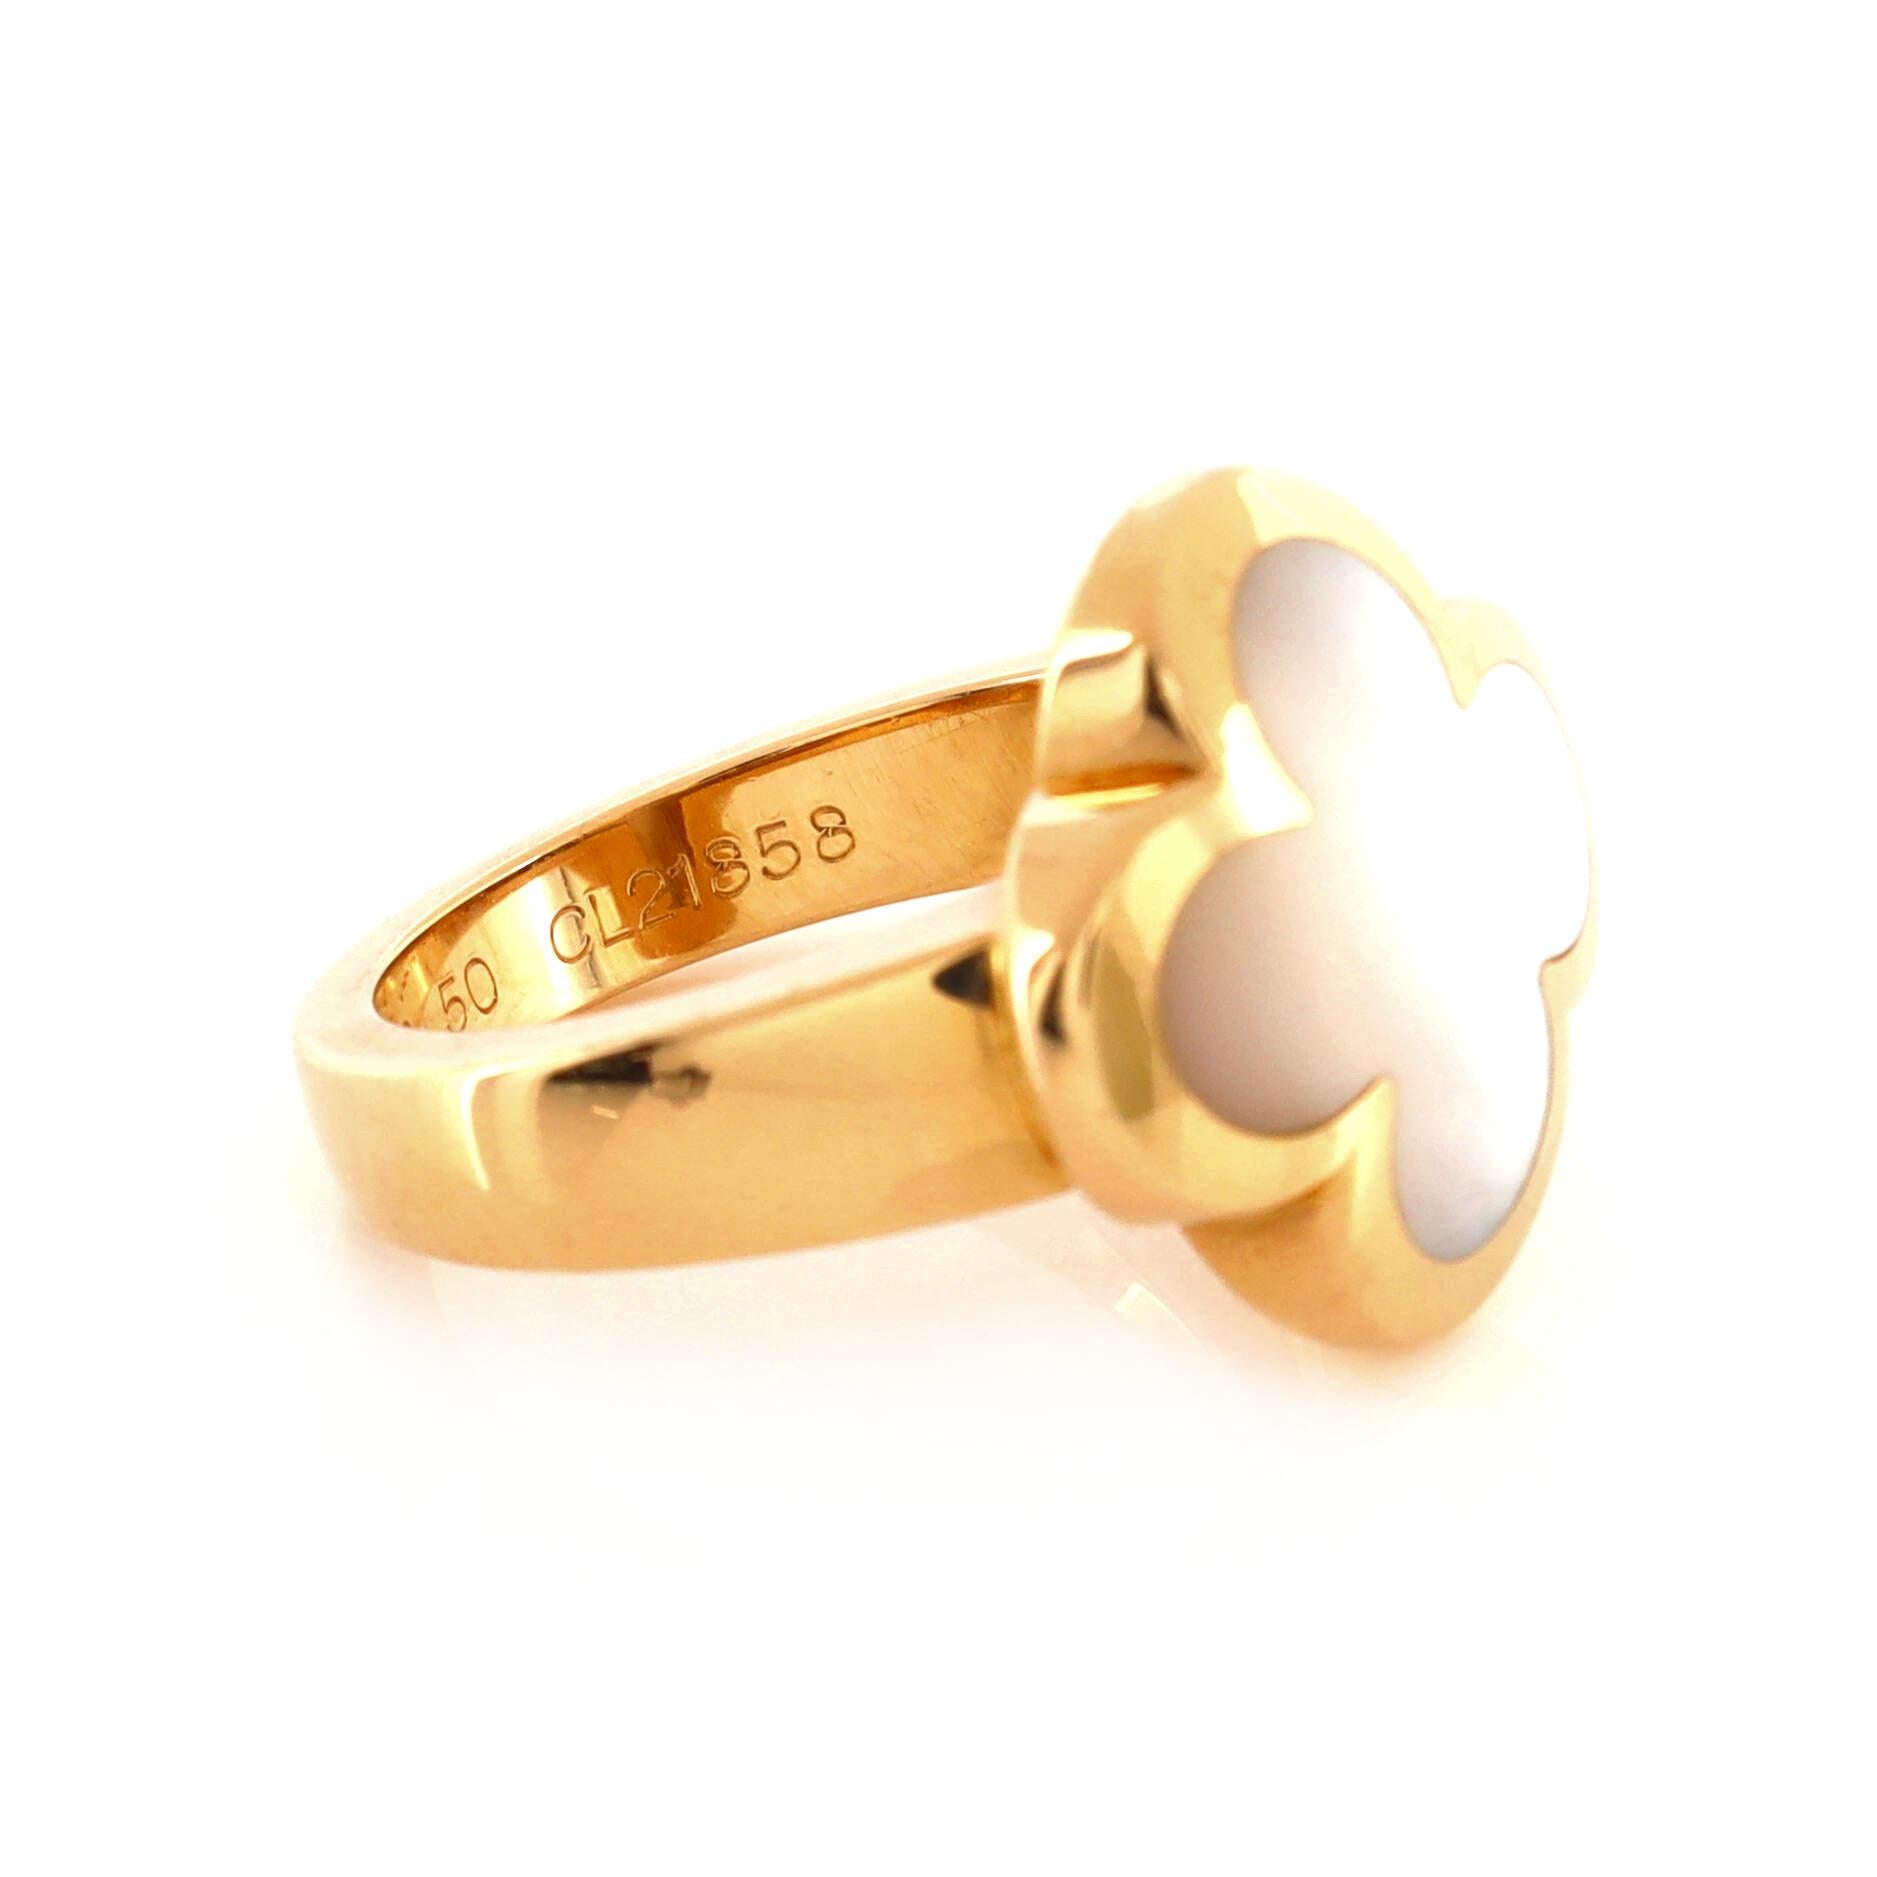 Women's Van Cleef & Arpels Pure Alhambra Ring 18k Yellow Gold and Mother of Pear